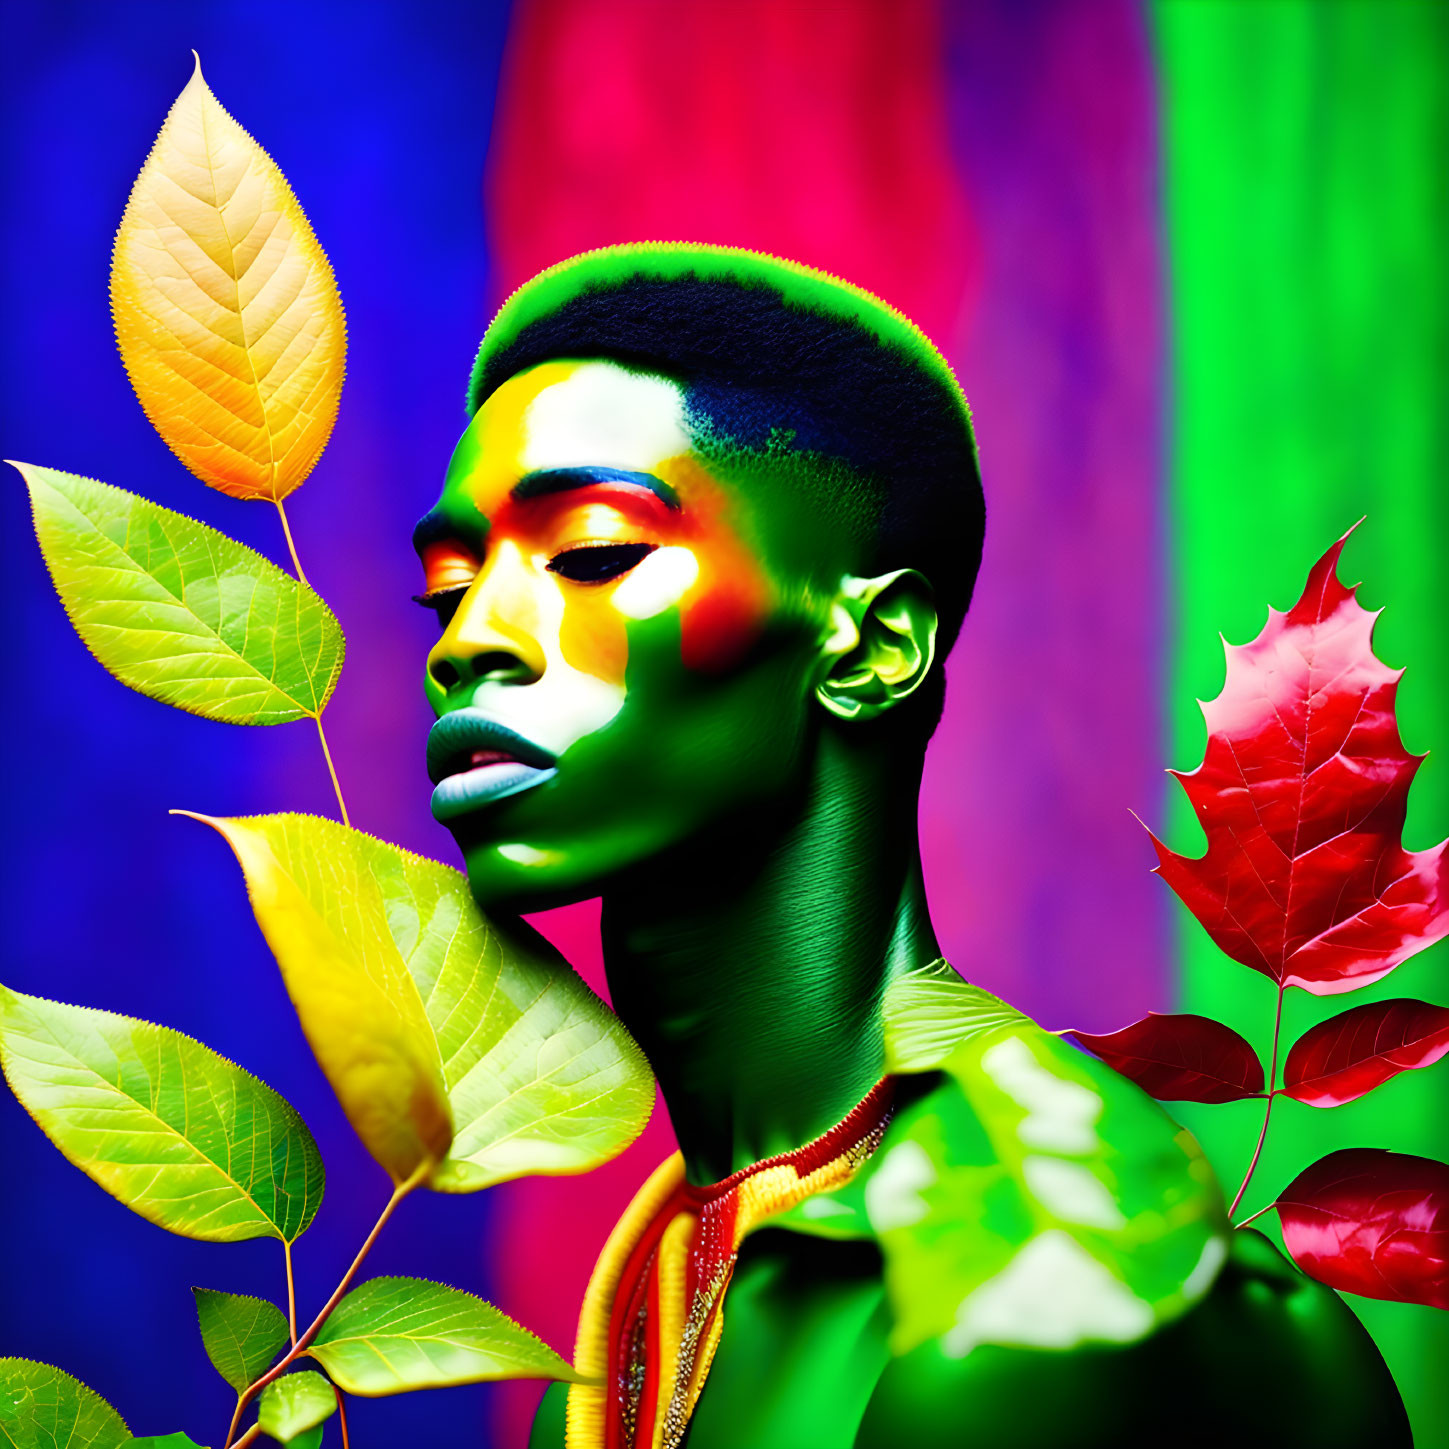 Colorful Portrait with Light and Leaves Against Multicolored Background